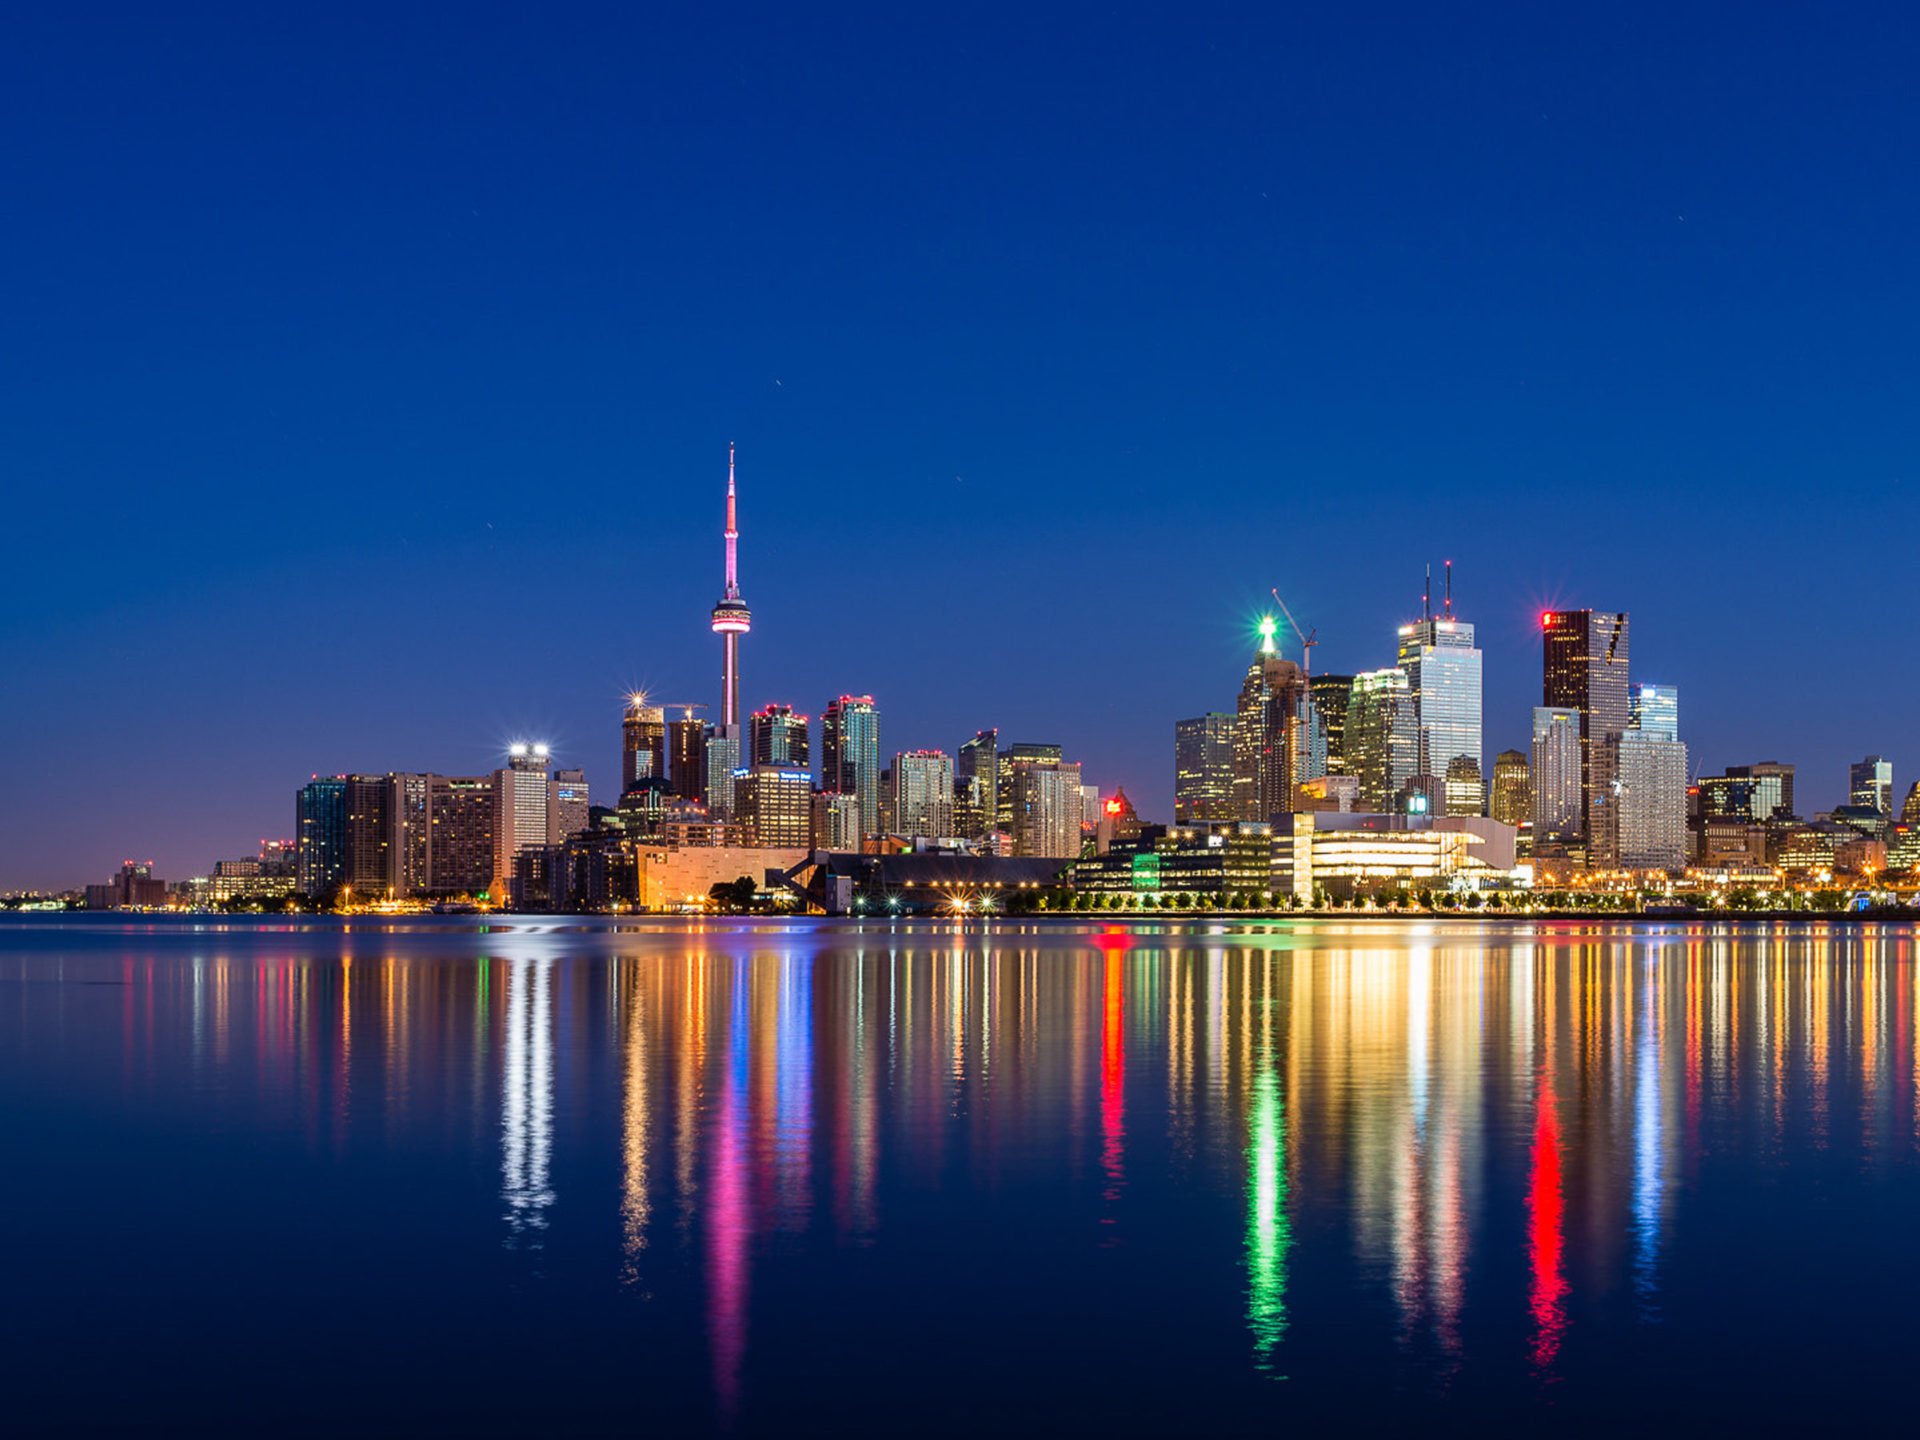 Toronto Skyline At Night Image Android Wallpaper For Your Desktop Or Phone 3840x2160, Wallpaper13.com